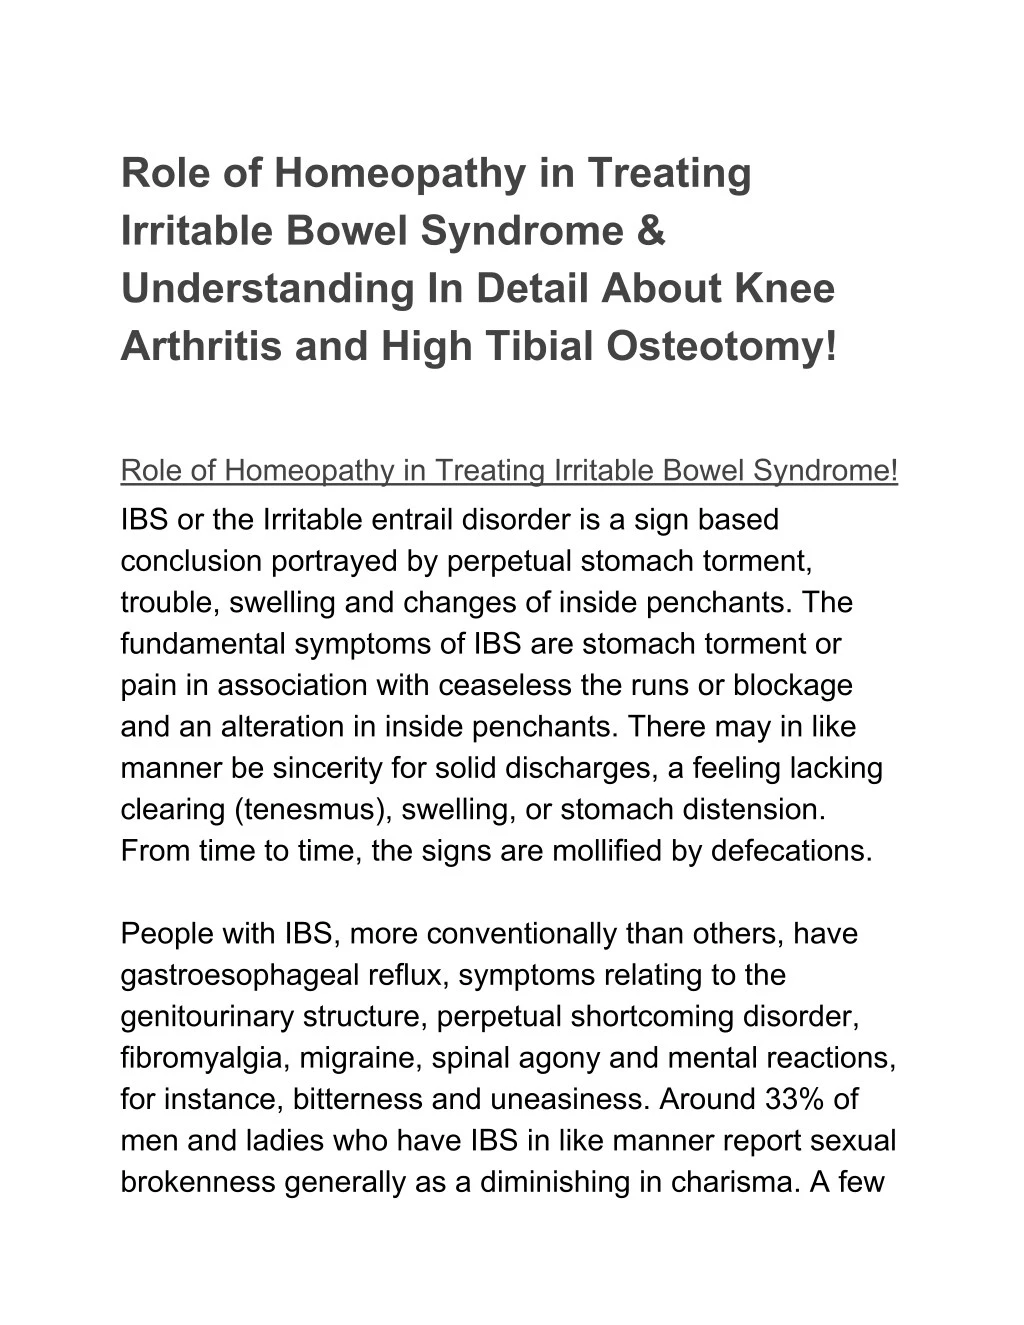 role of homeopathy in treating irritable bowel